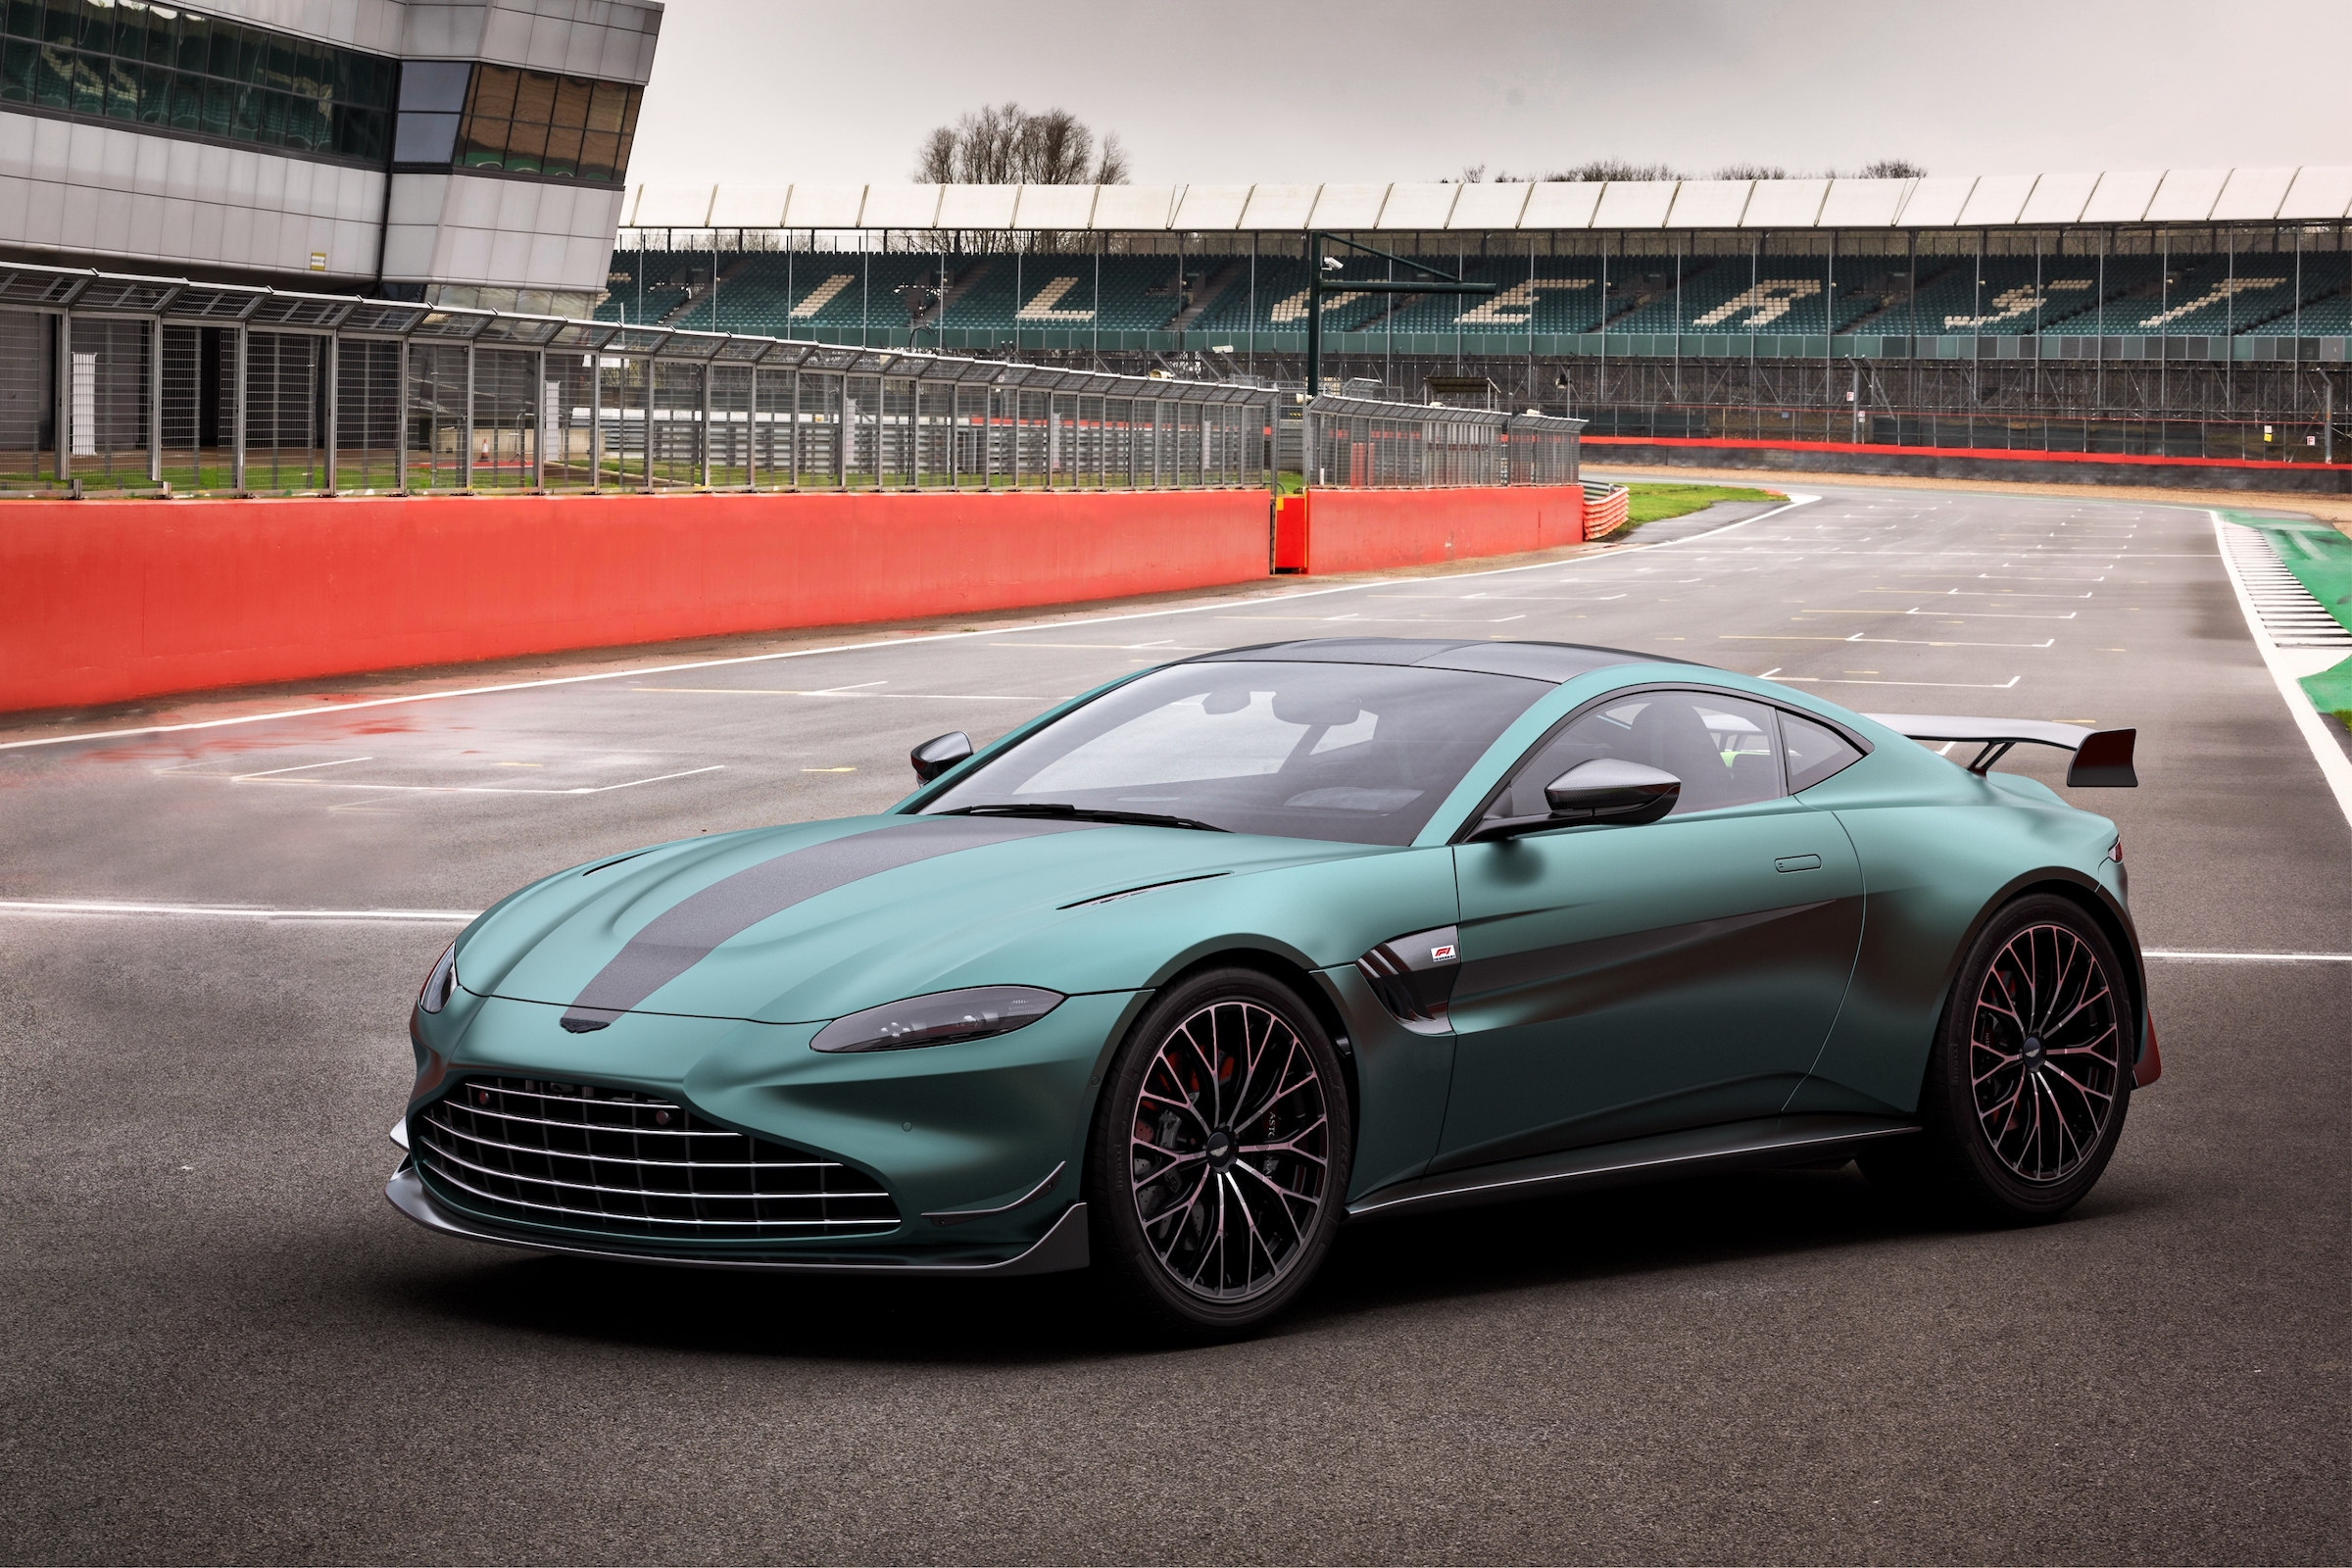 Aston Martin F1 Edition to be the fastest Vantage